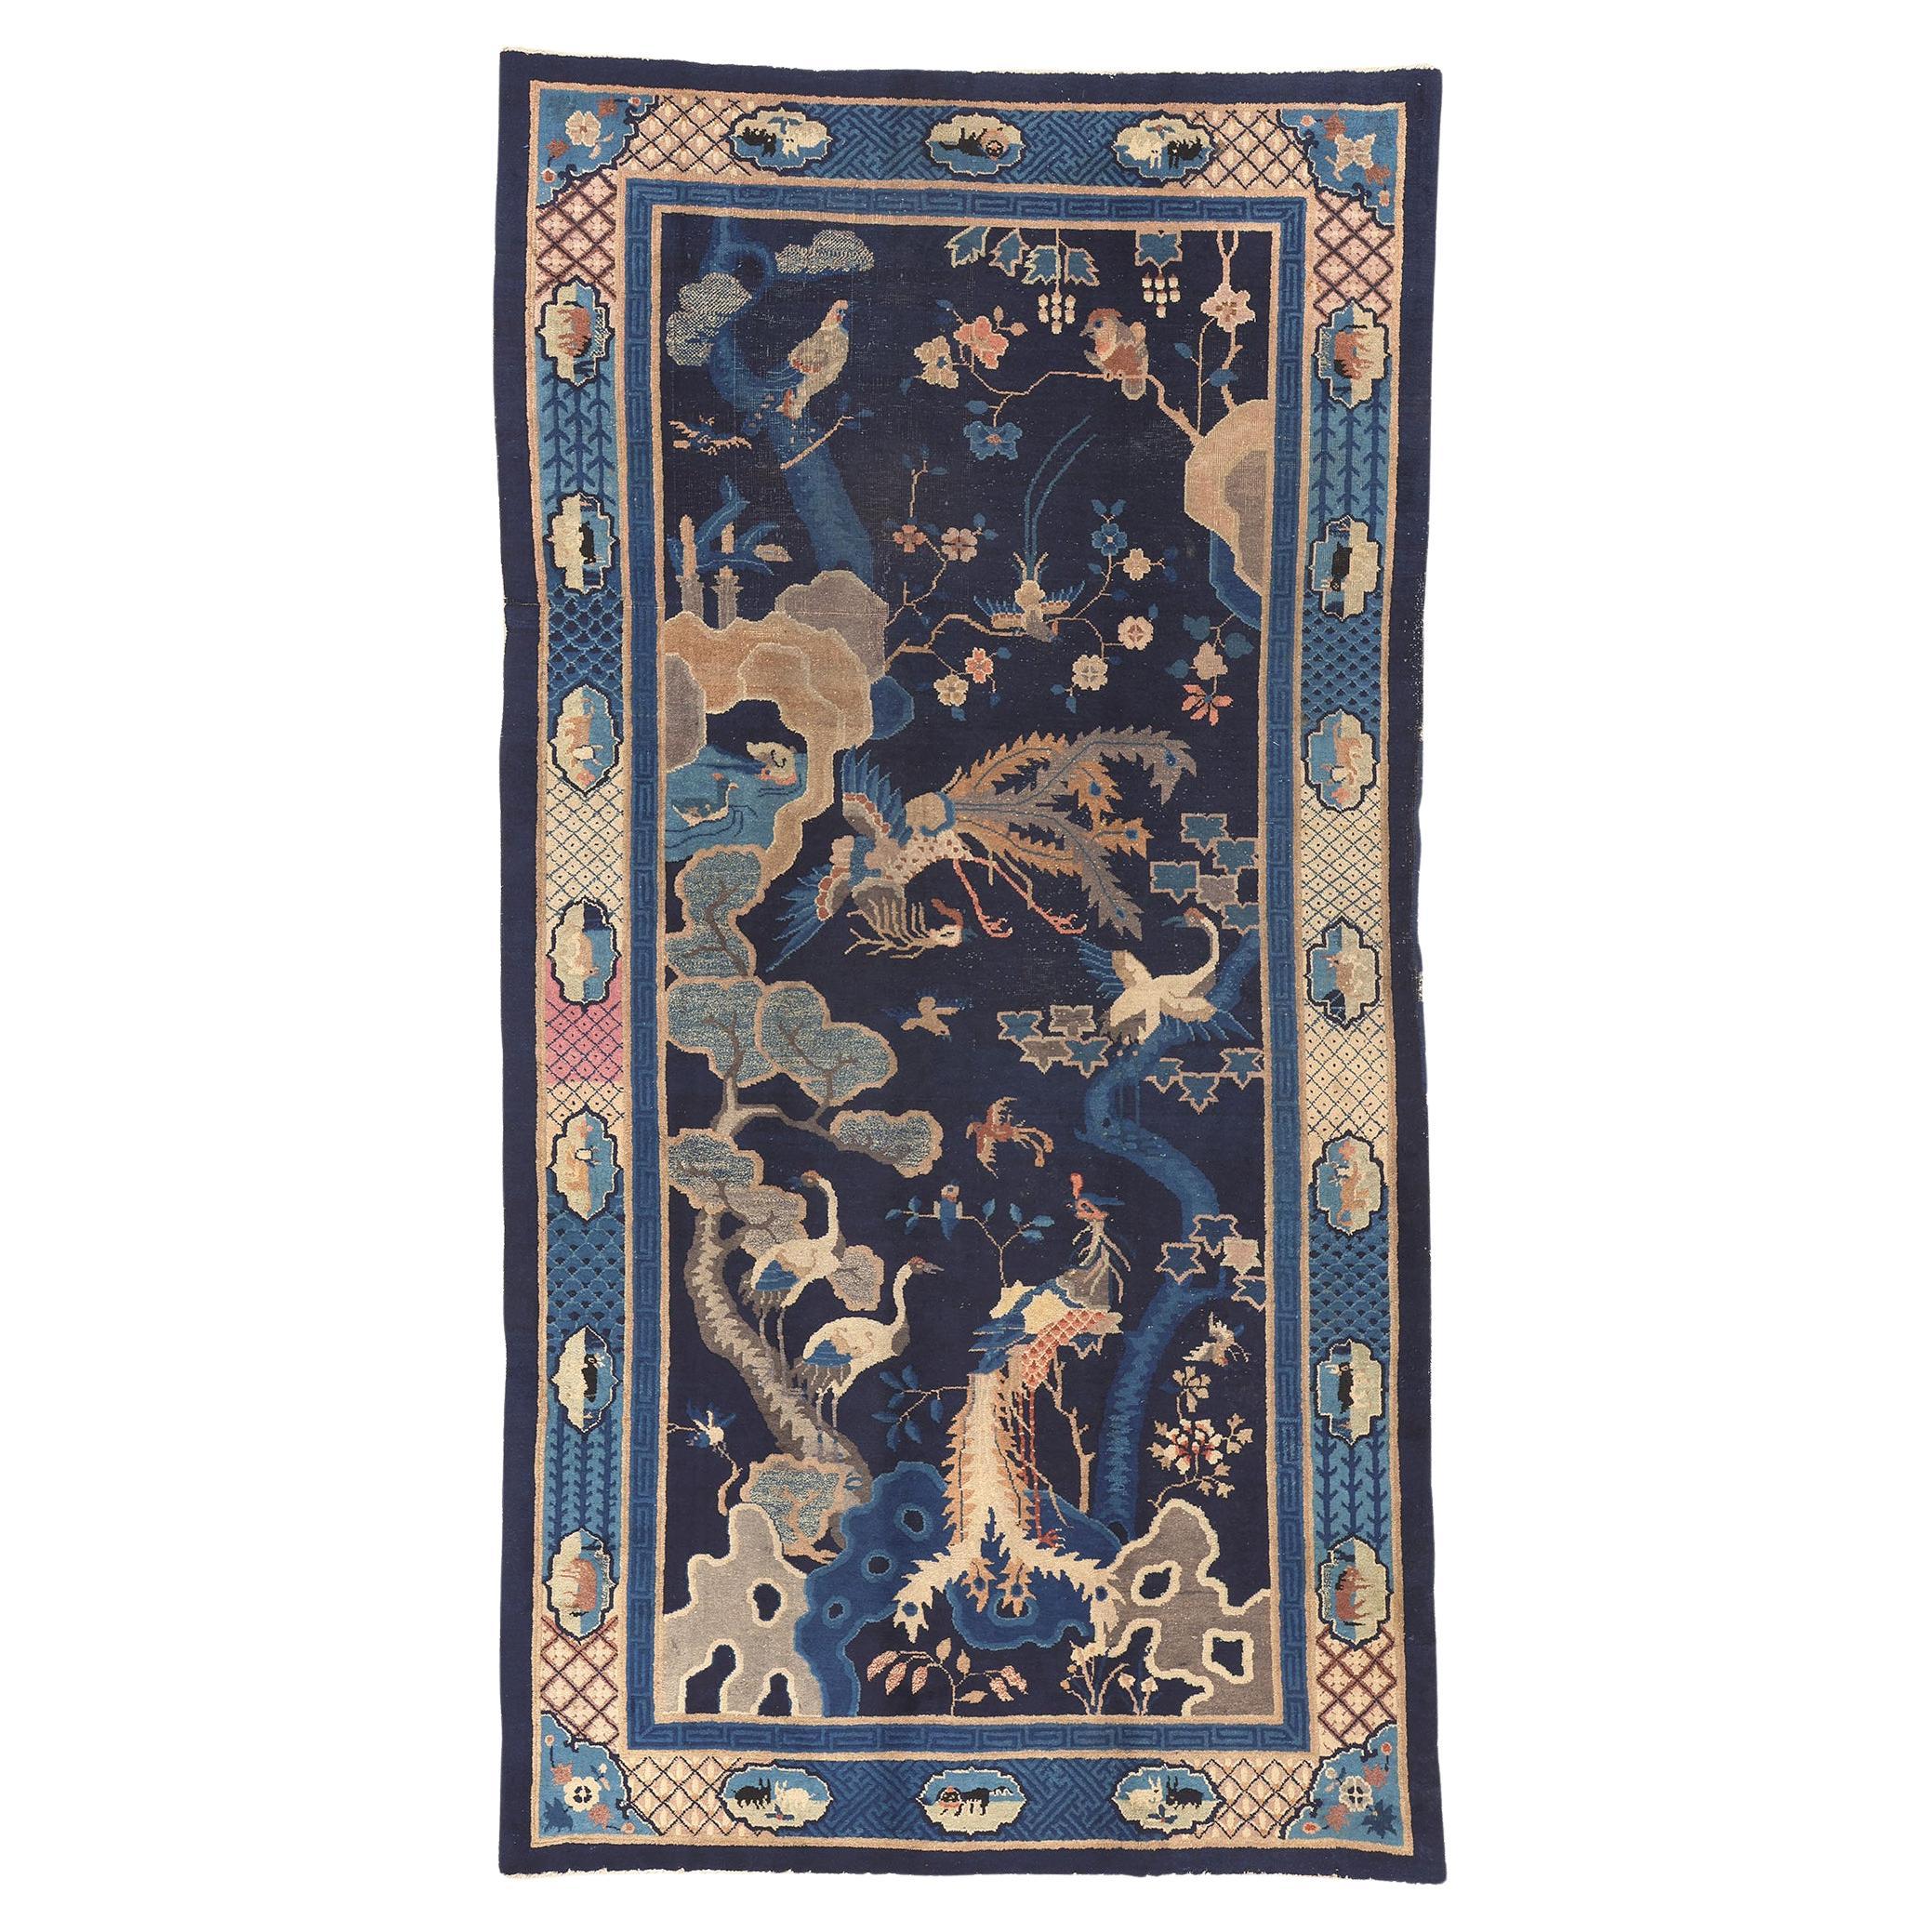 Antique Chinese Pictorial Rug, Bai Niao Chao Feng, Birds Saluting the Phoenix